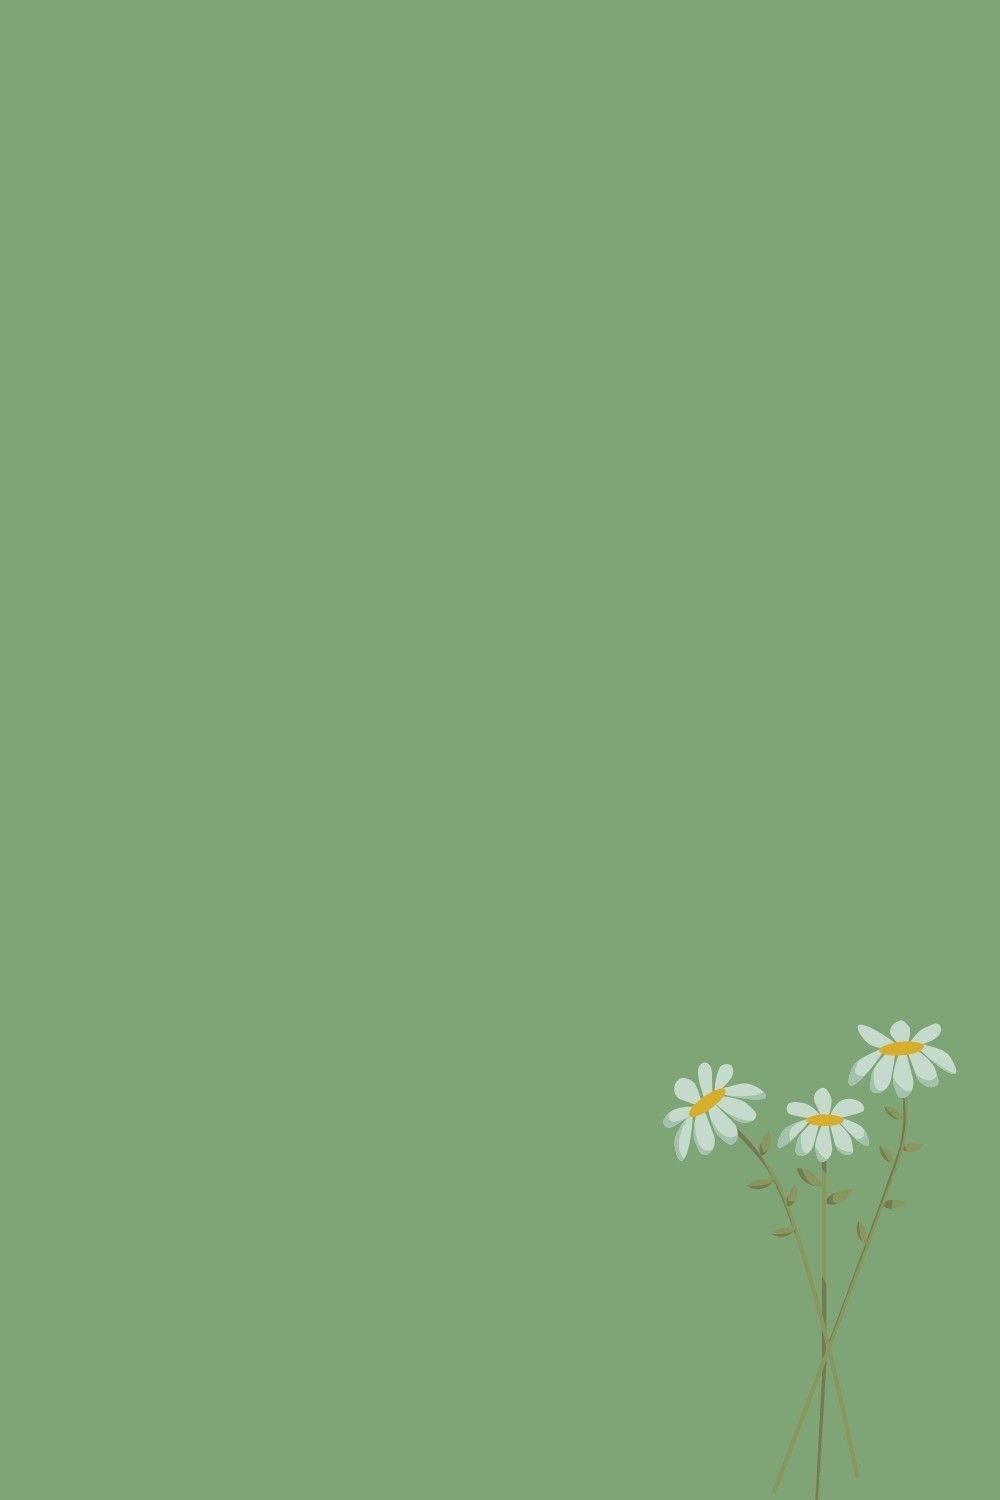 Sage Green Wallpaper for mobile phone, tablet, desktop computer and other devices HD and 4K wa. iPhone wallpaper green, Sage green wallpaper, Mint green wallpaper